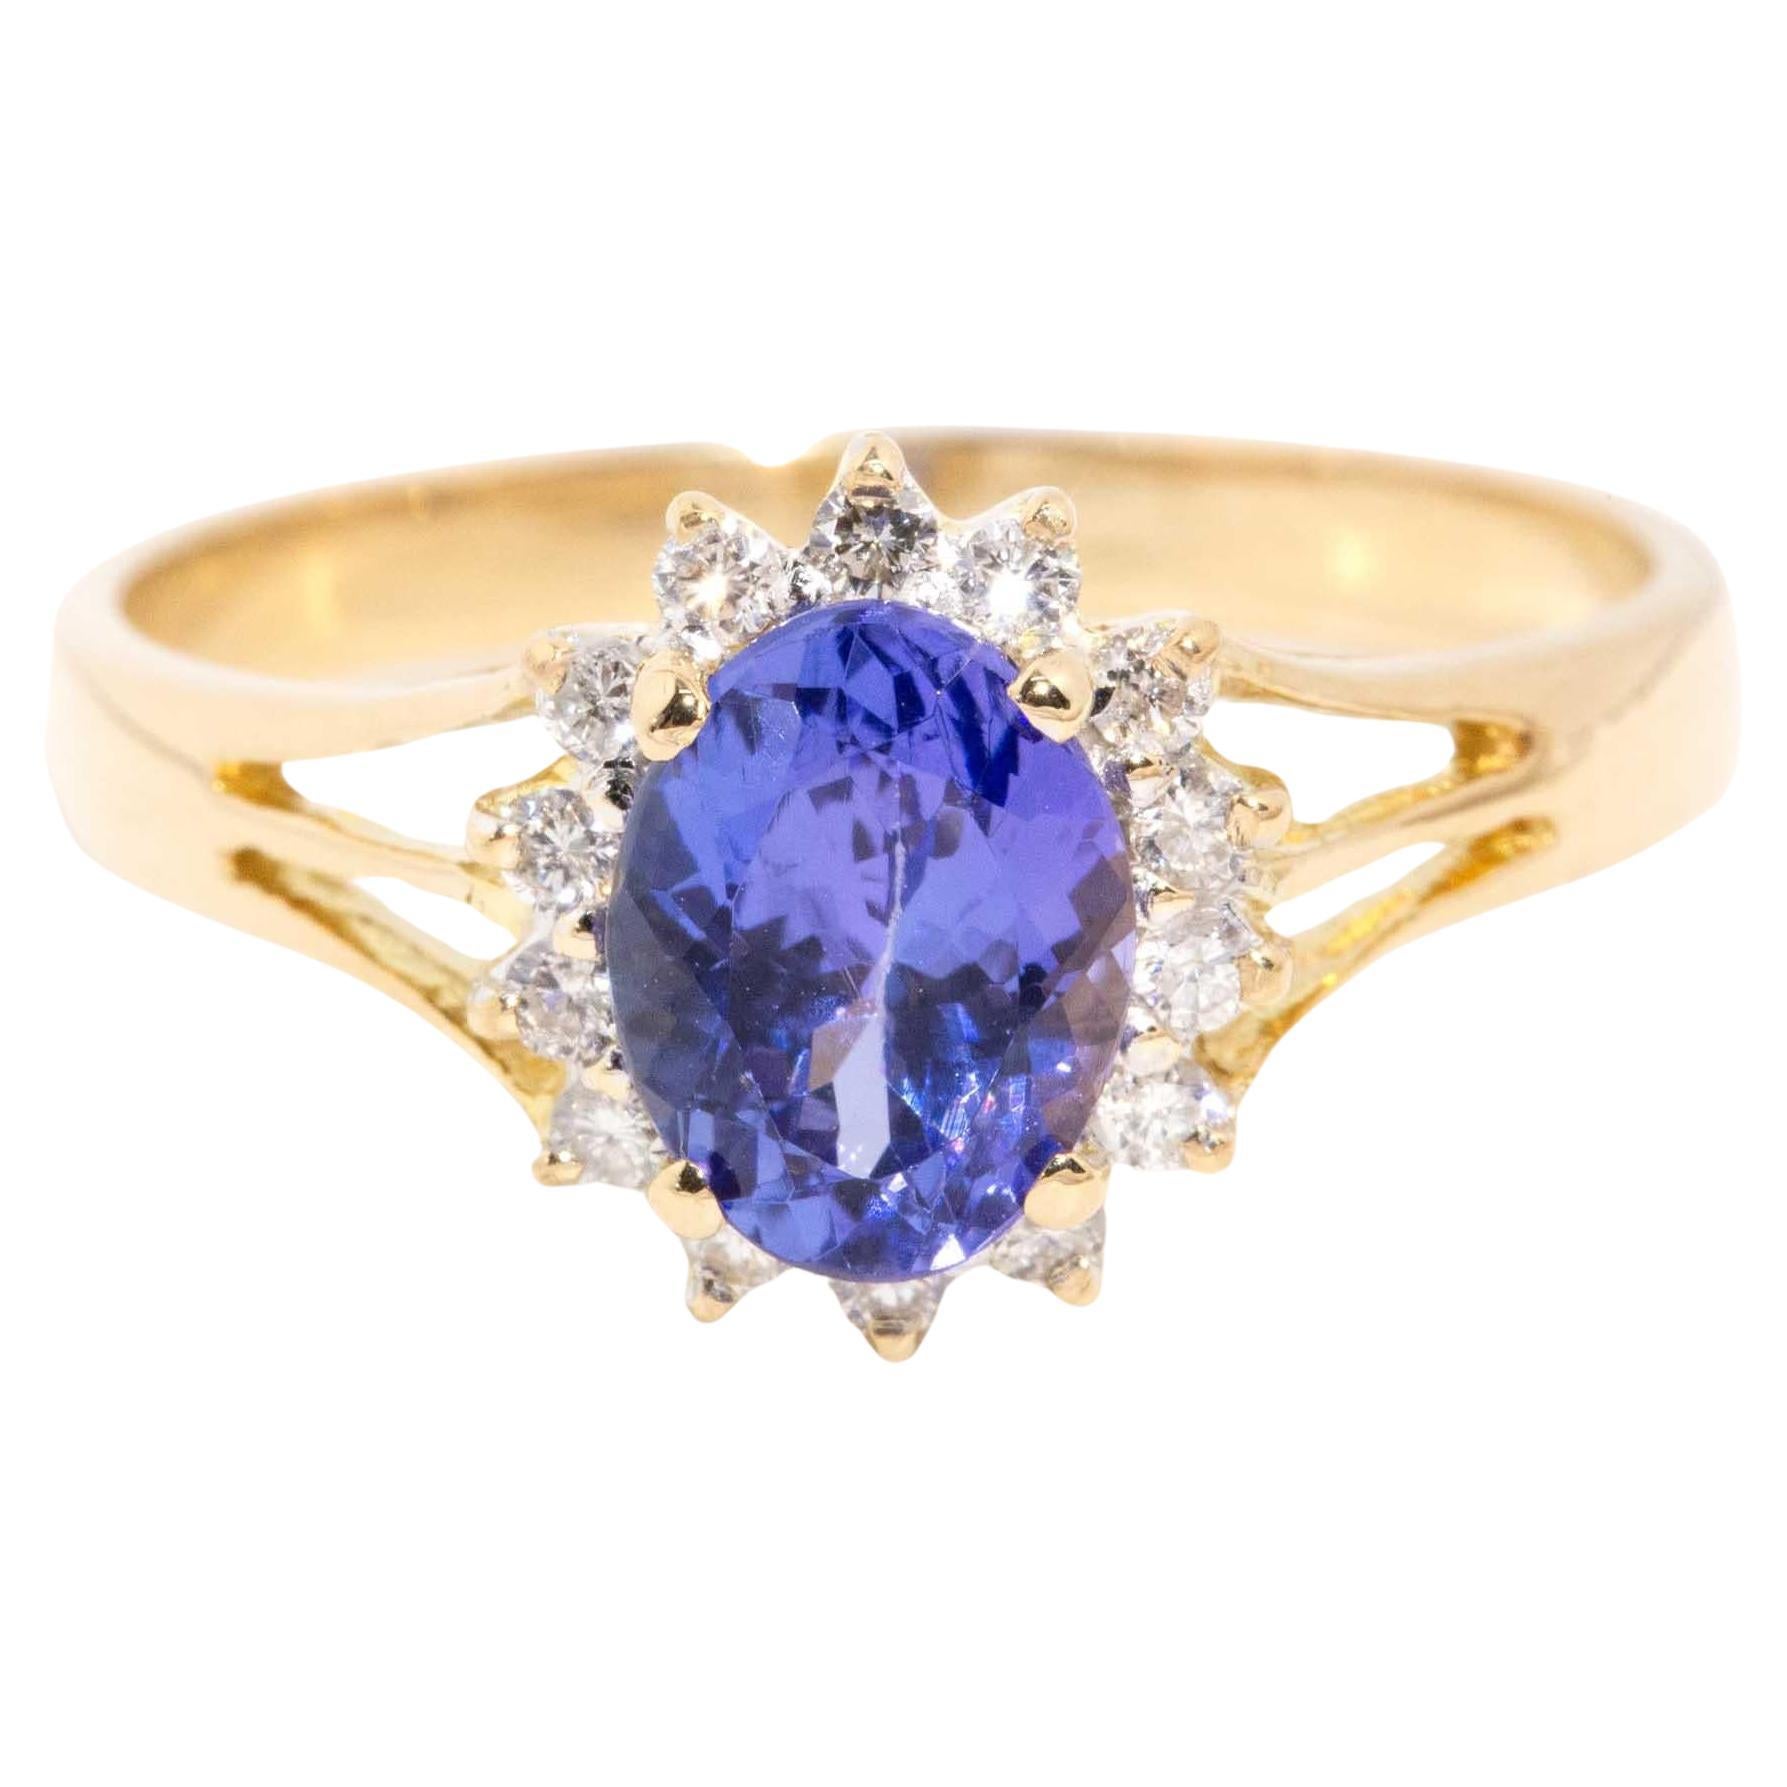 How much is a carat of tanzanite worth?